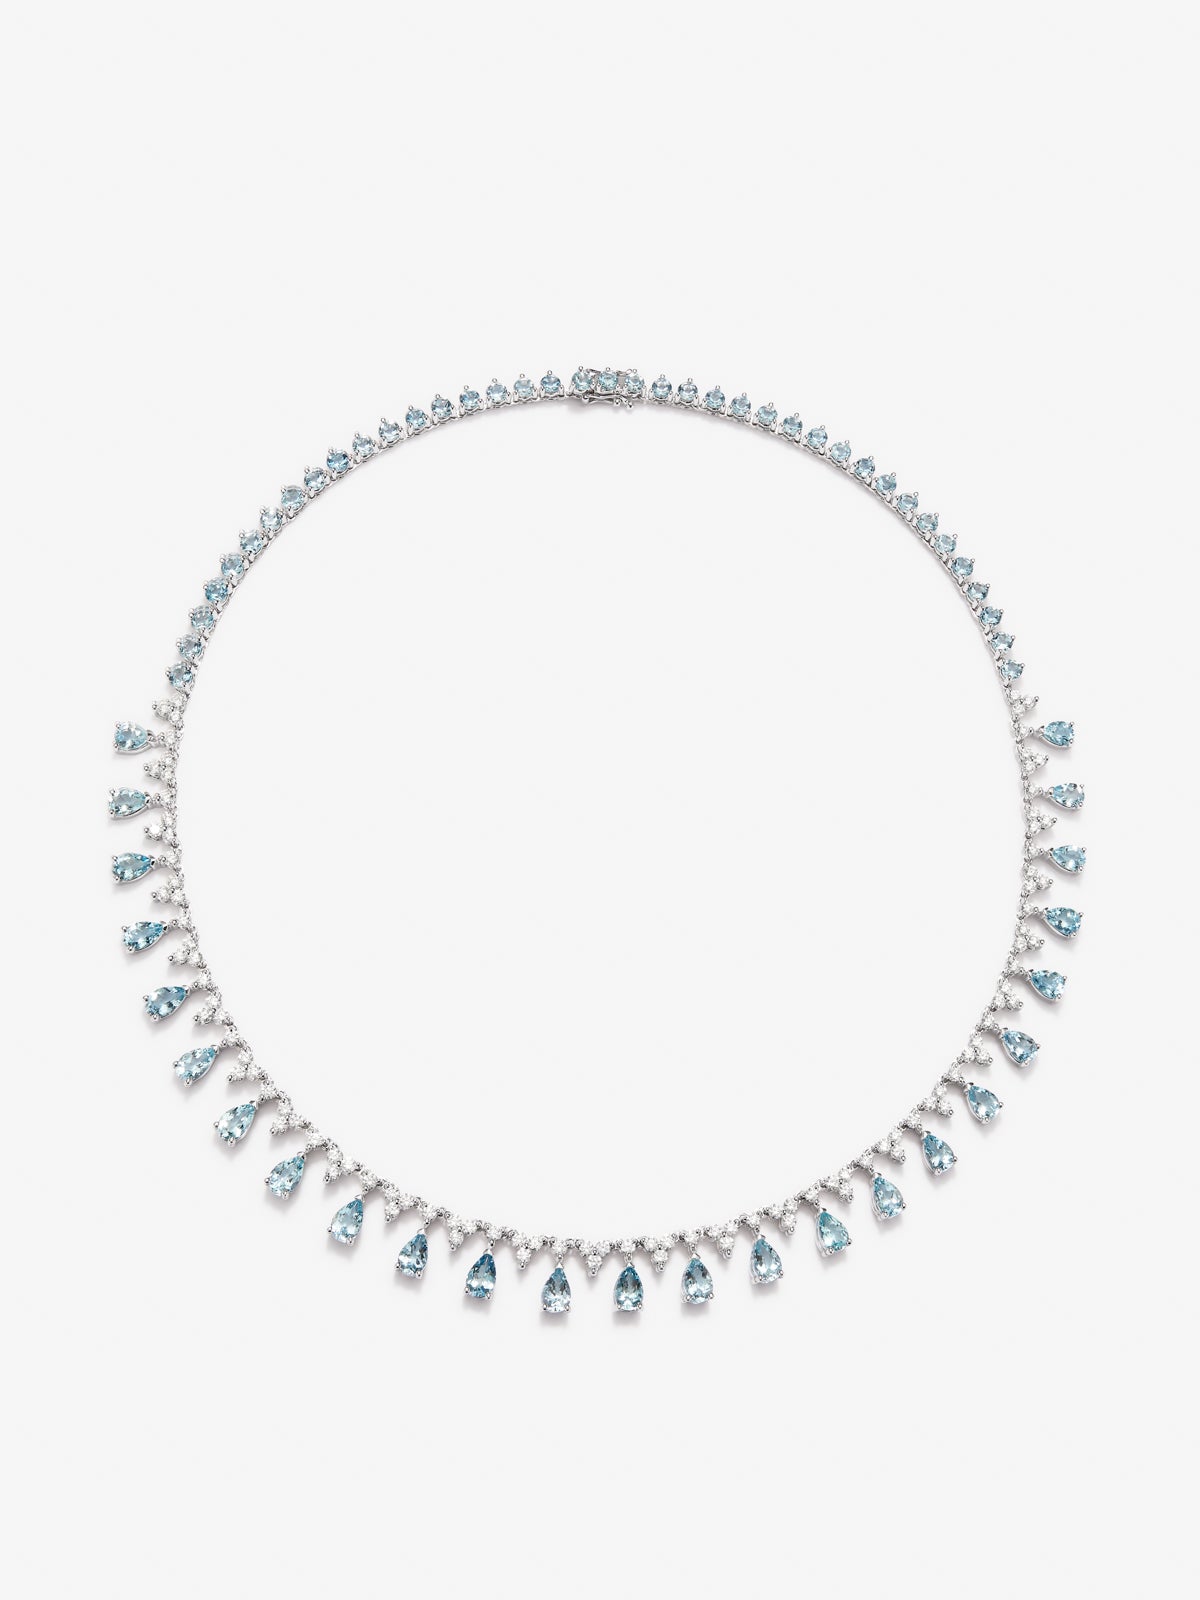 18K White Gold Rivière Collar with blue and bright blue aquamarines of 14.19 cts and white diamonds in bright size of 3.82 cts